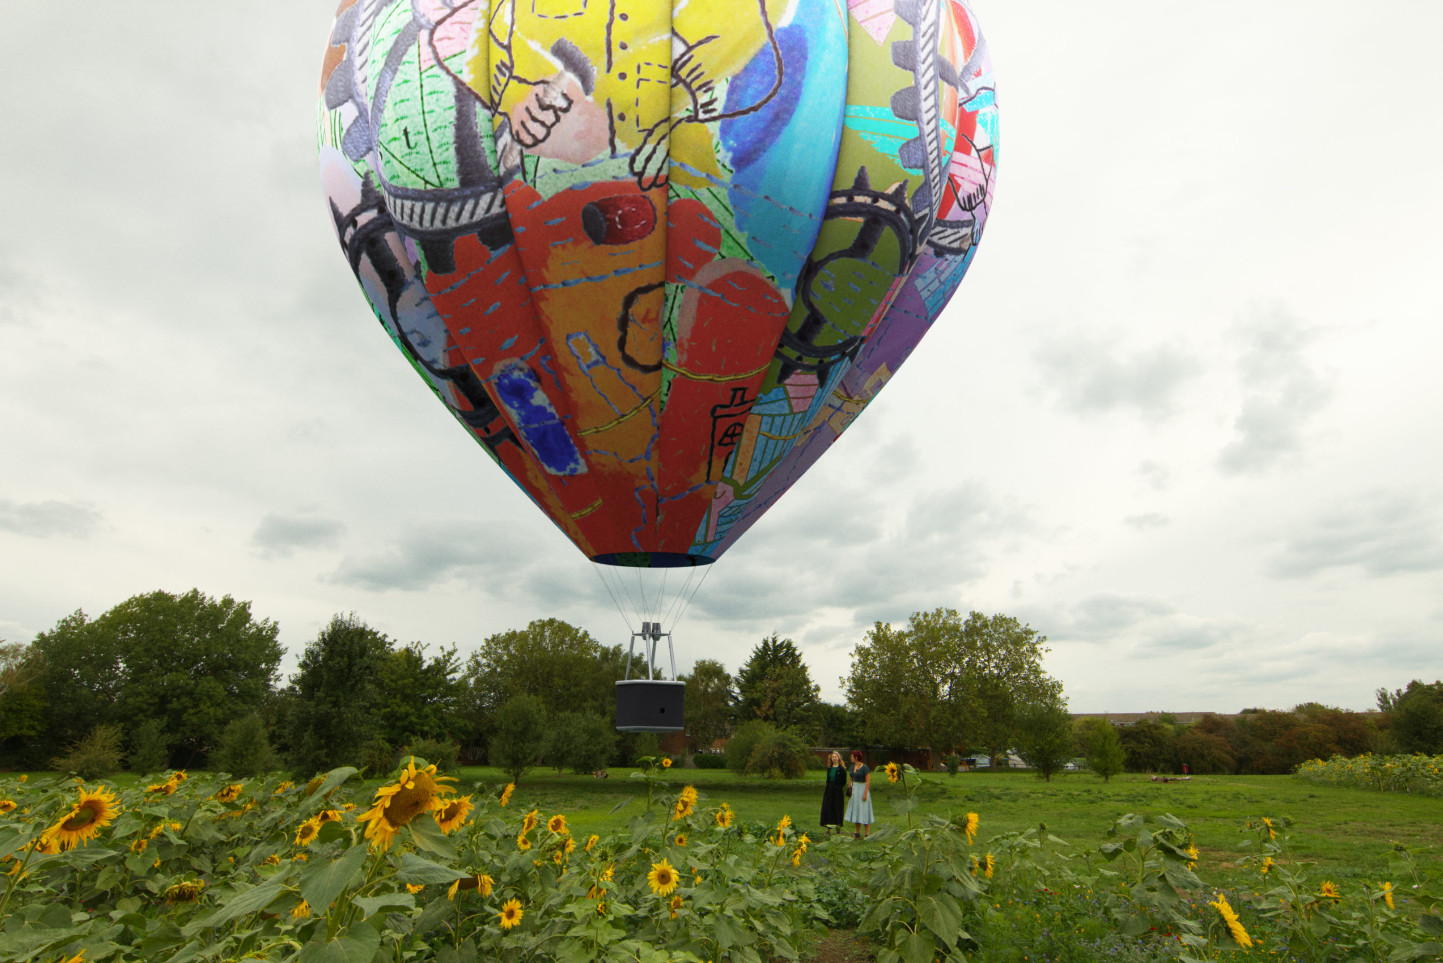 Hot air balloon sculpture and royal school of needlework collaboration launch and flight dates announced